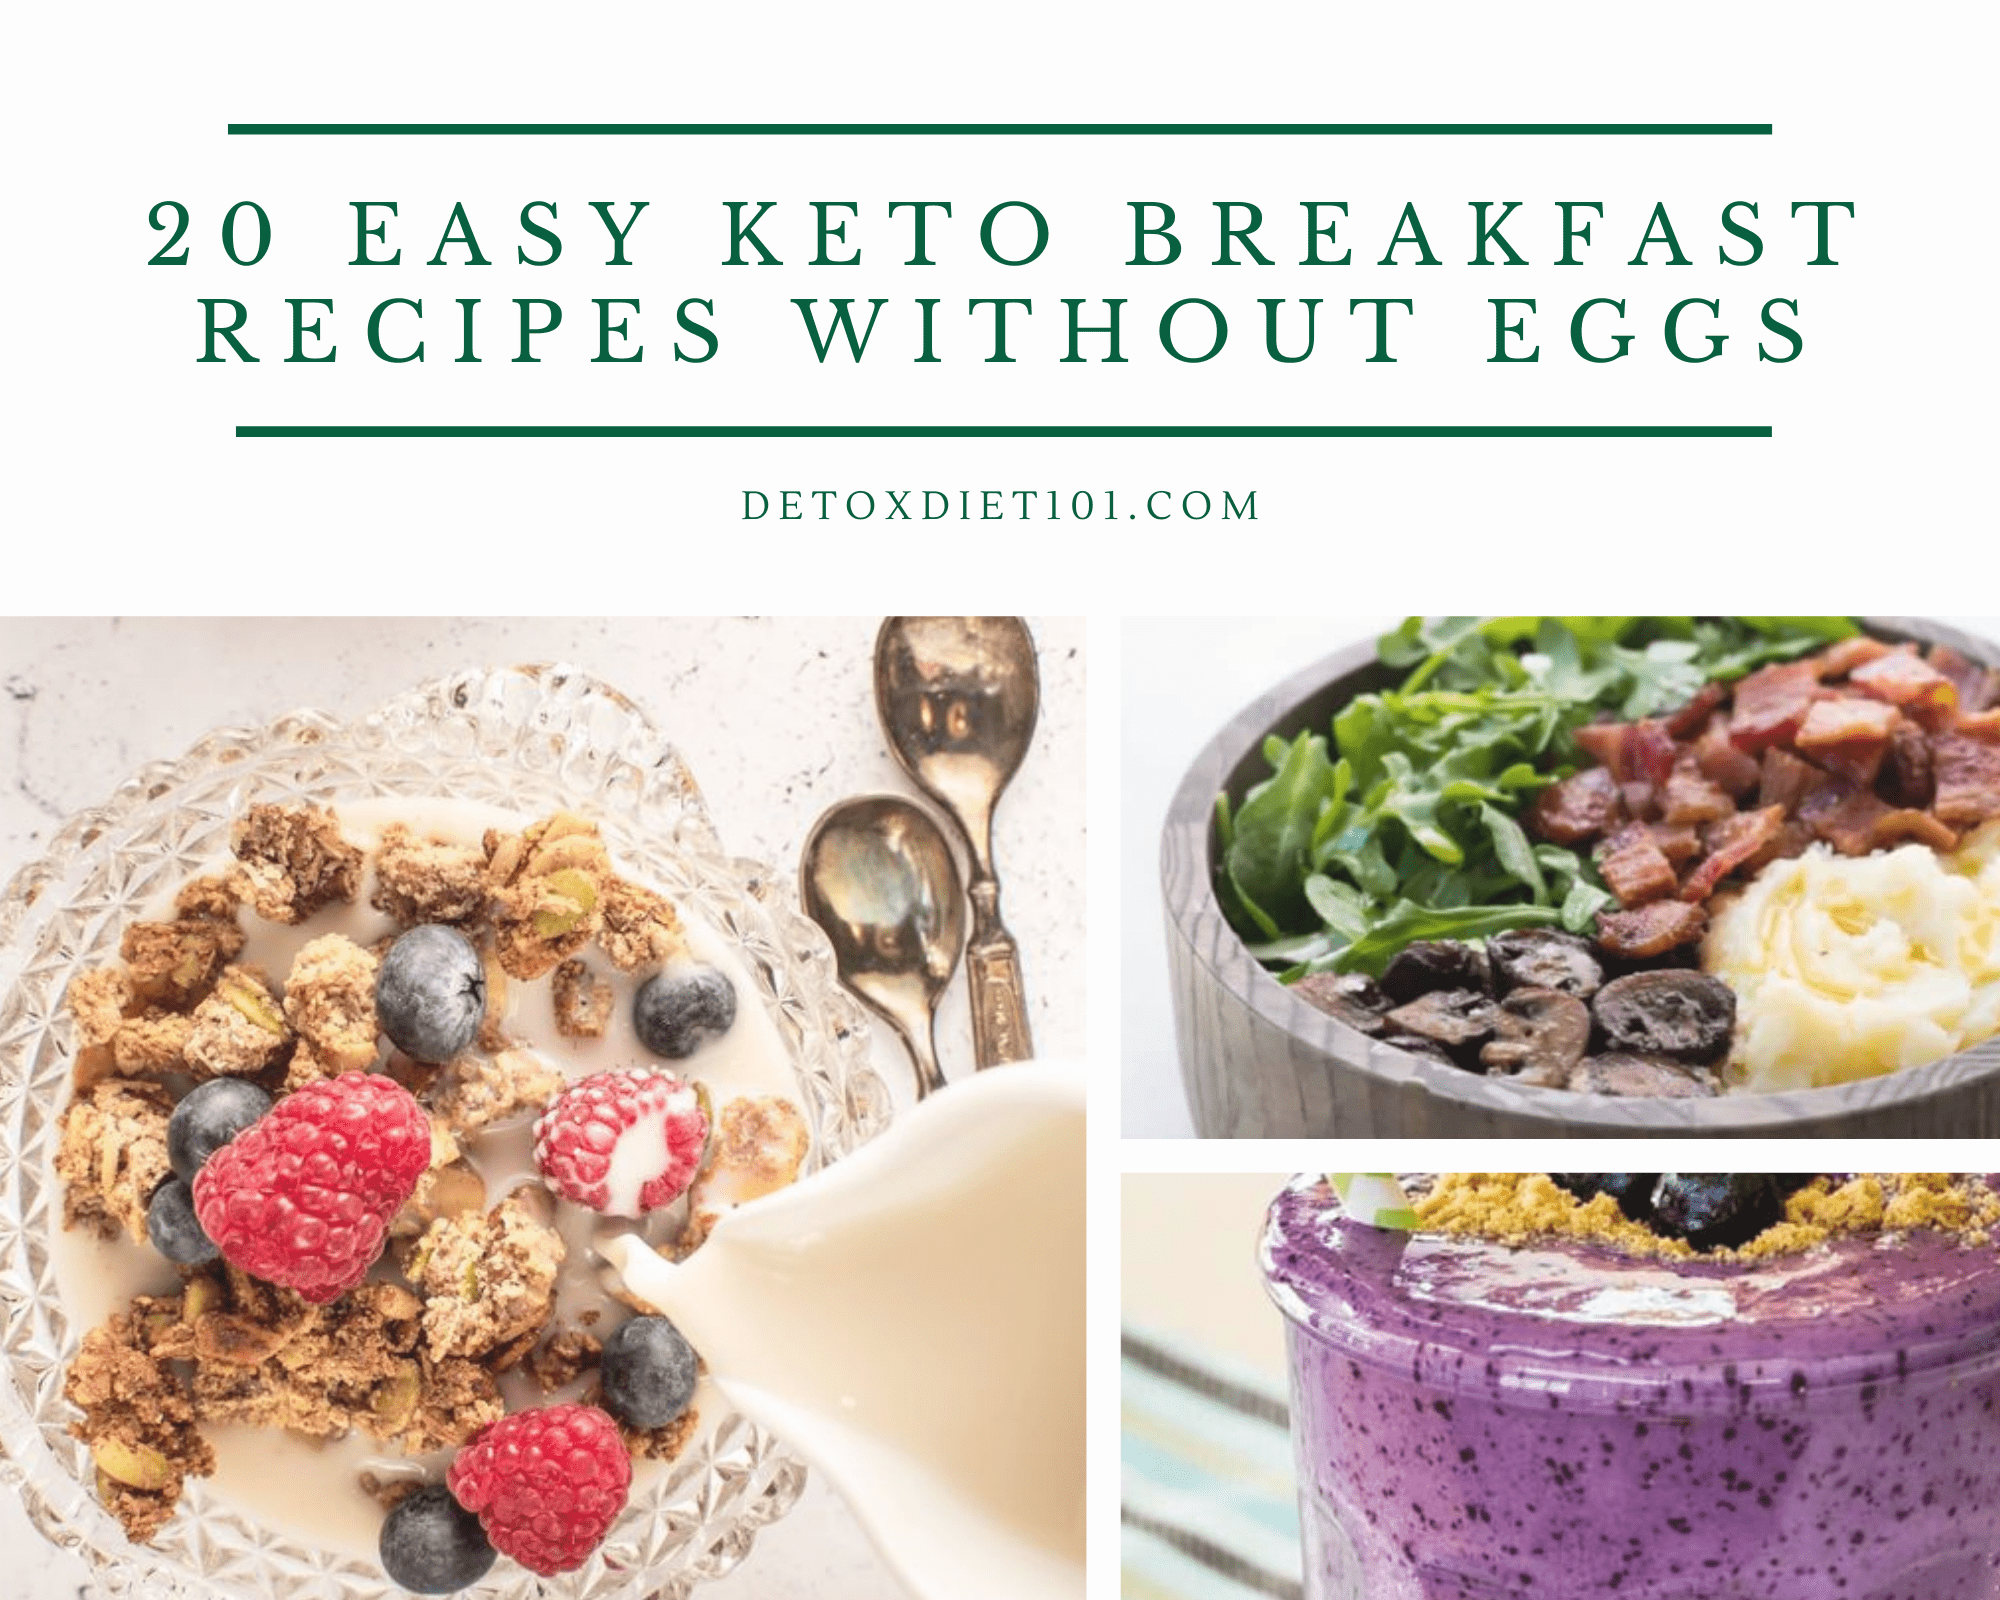 Keto Breakfast Recipes Without Eggs